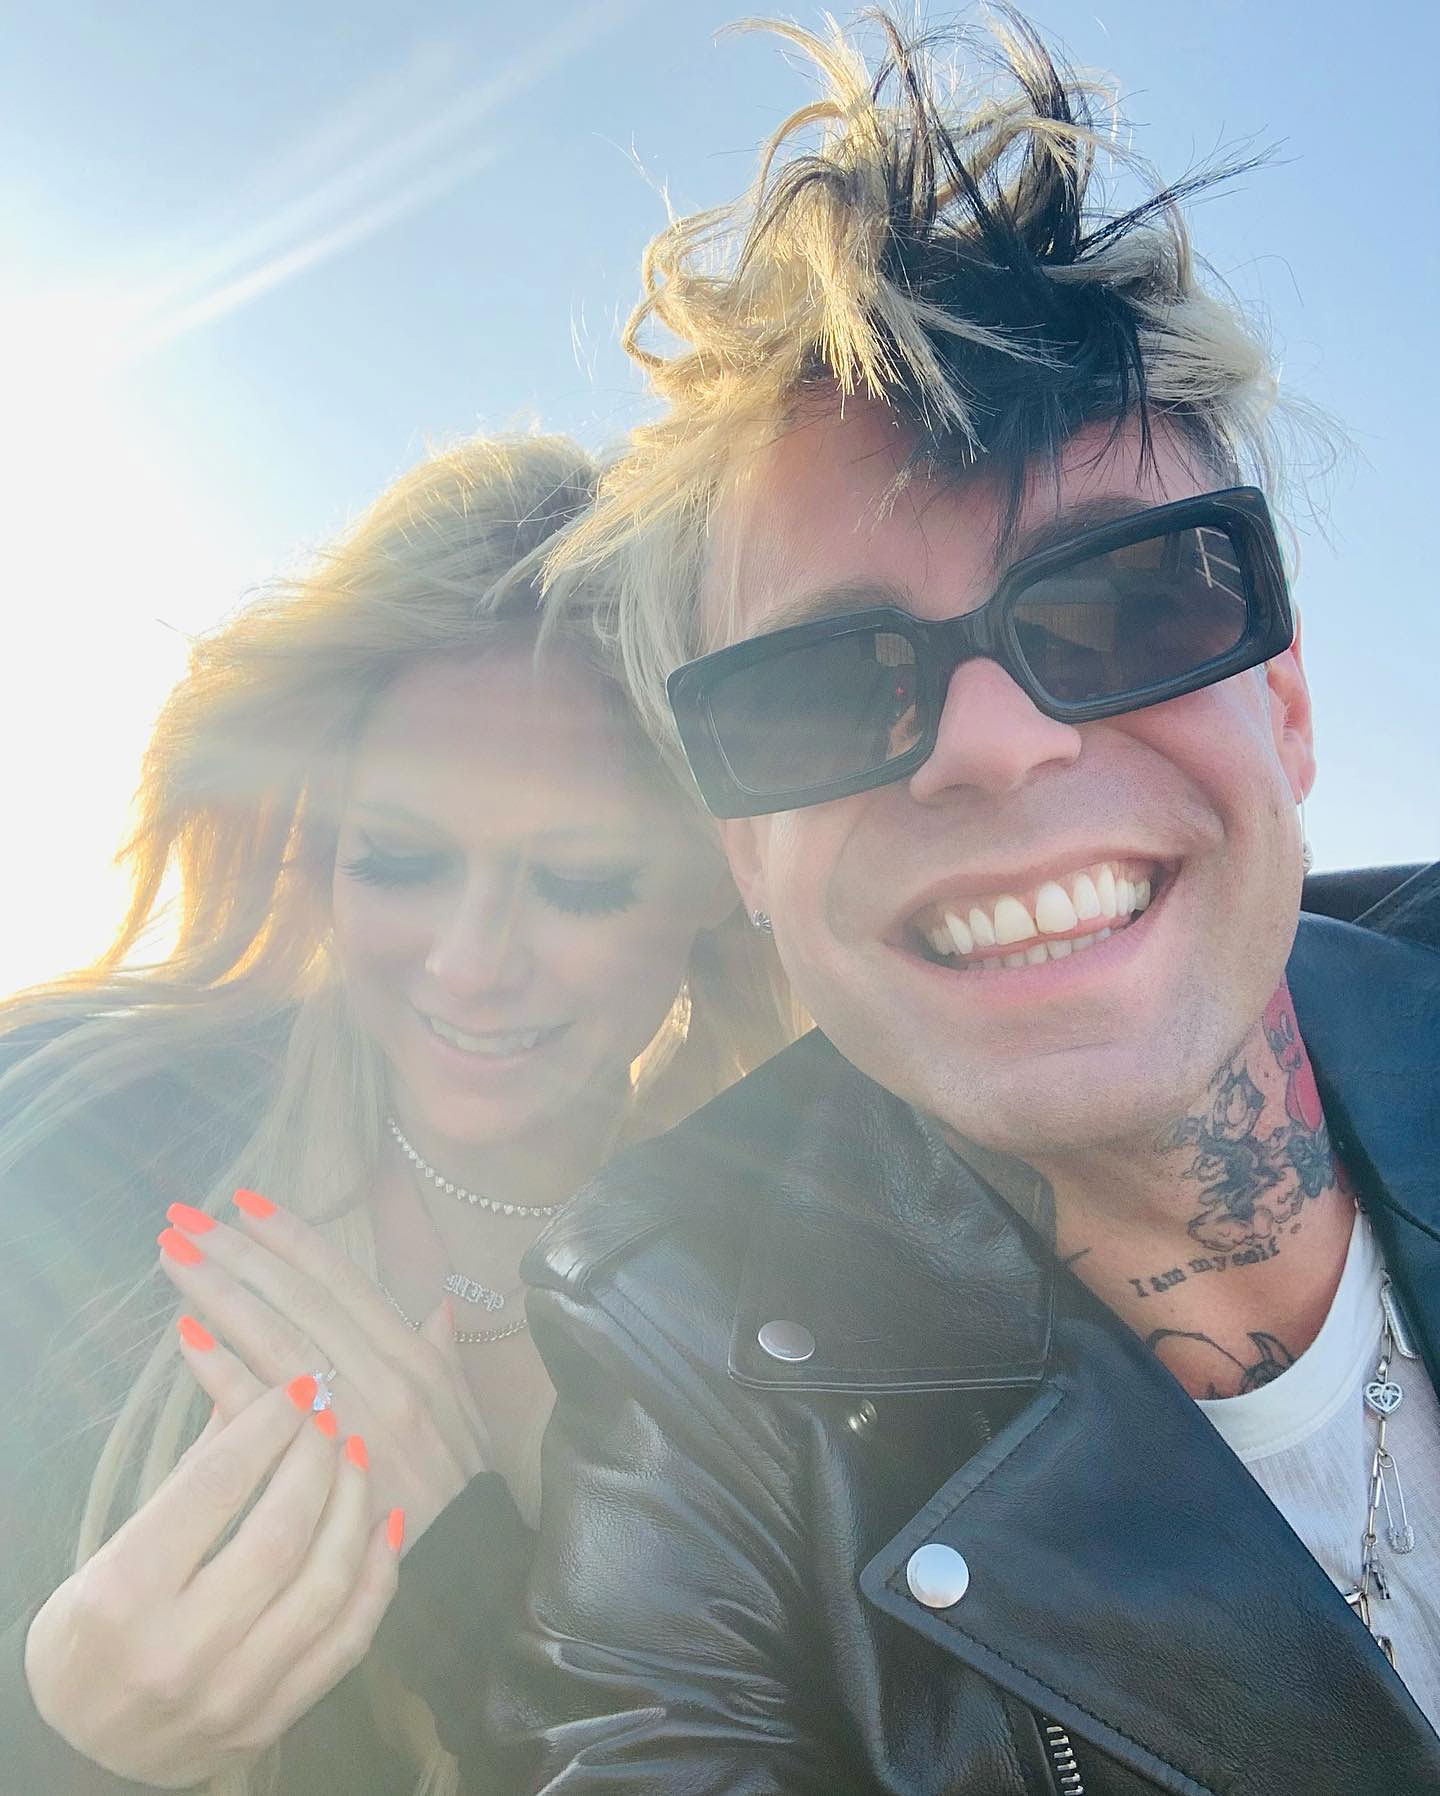 Avril Lavigne and Mod Sun Are Engaged After 1 Year of Dating